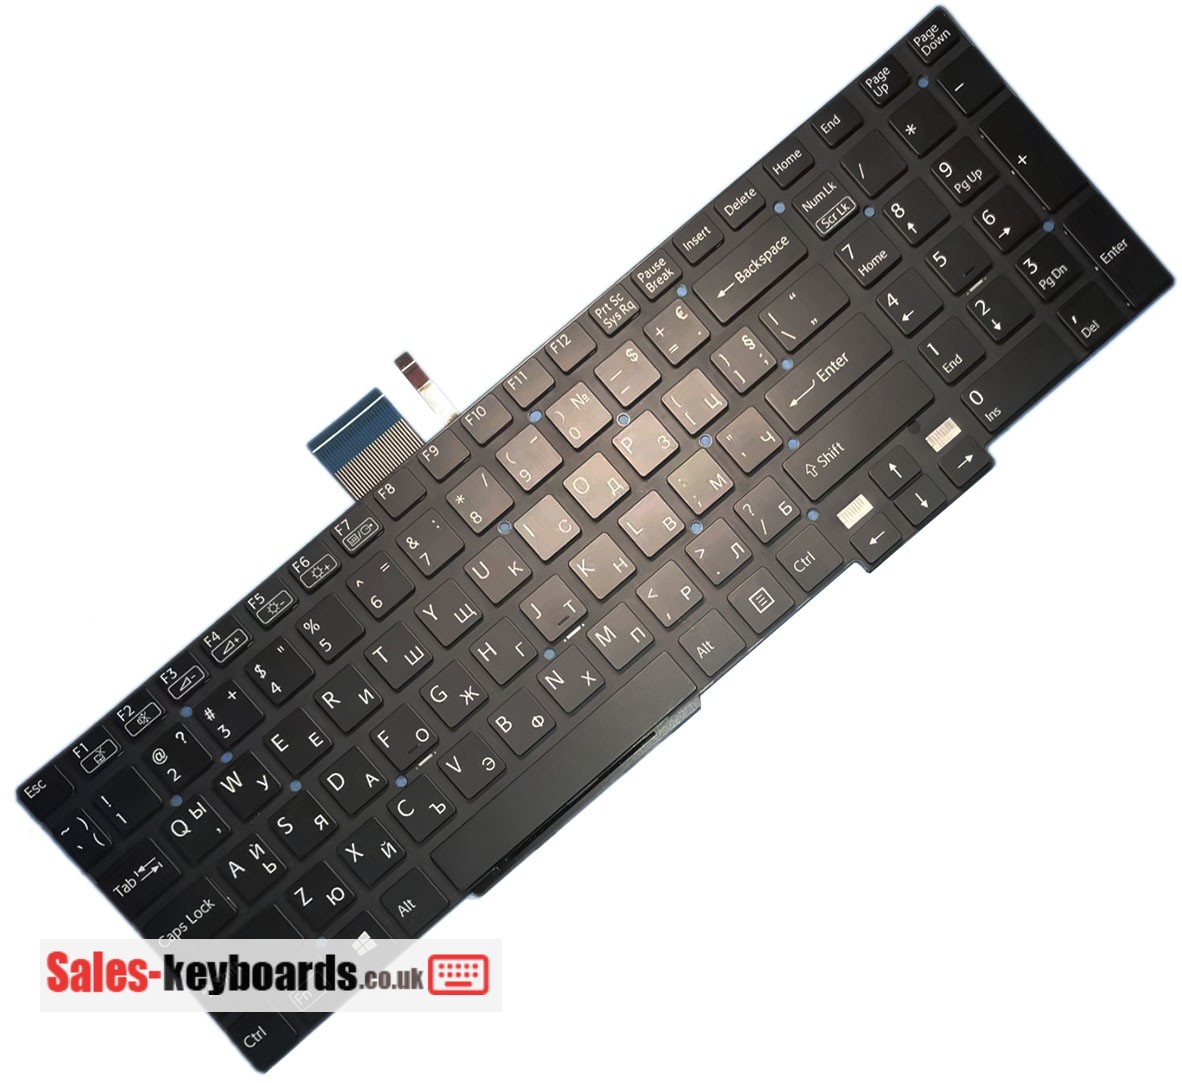 Sony VAIO SVT1511M1R Keyboard replacement